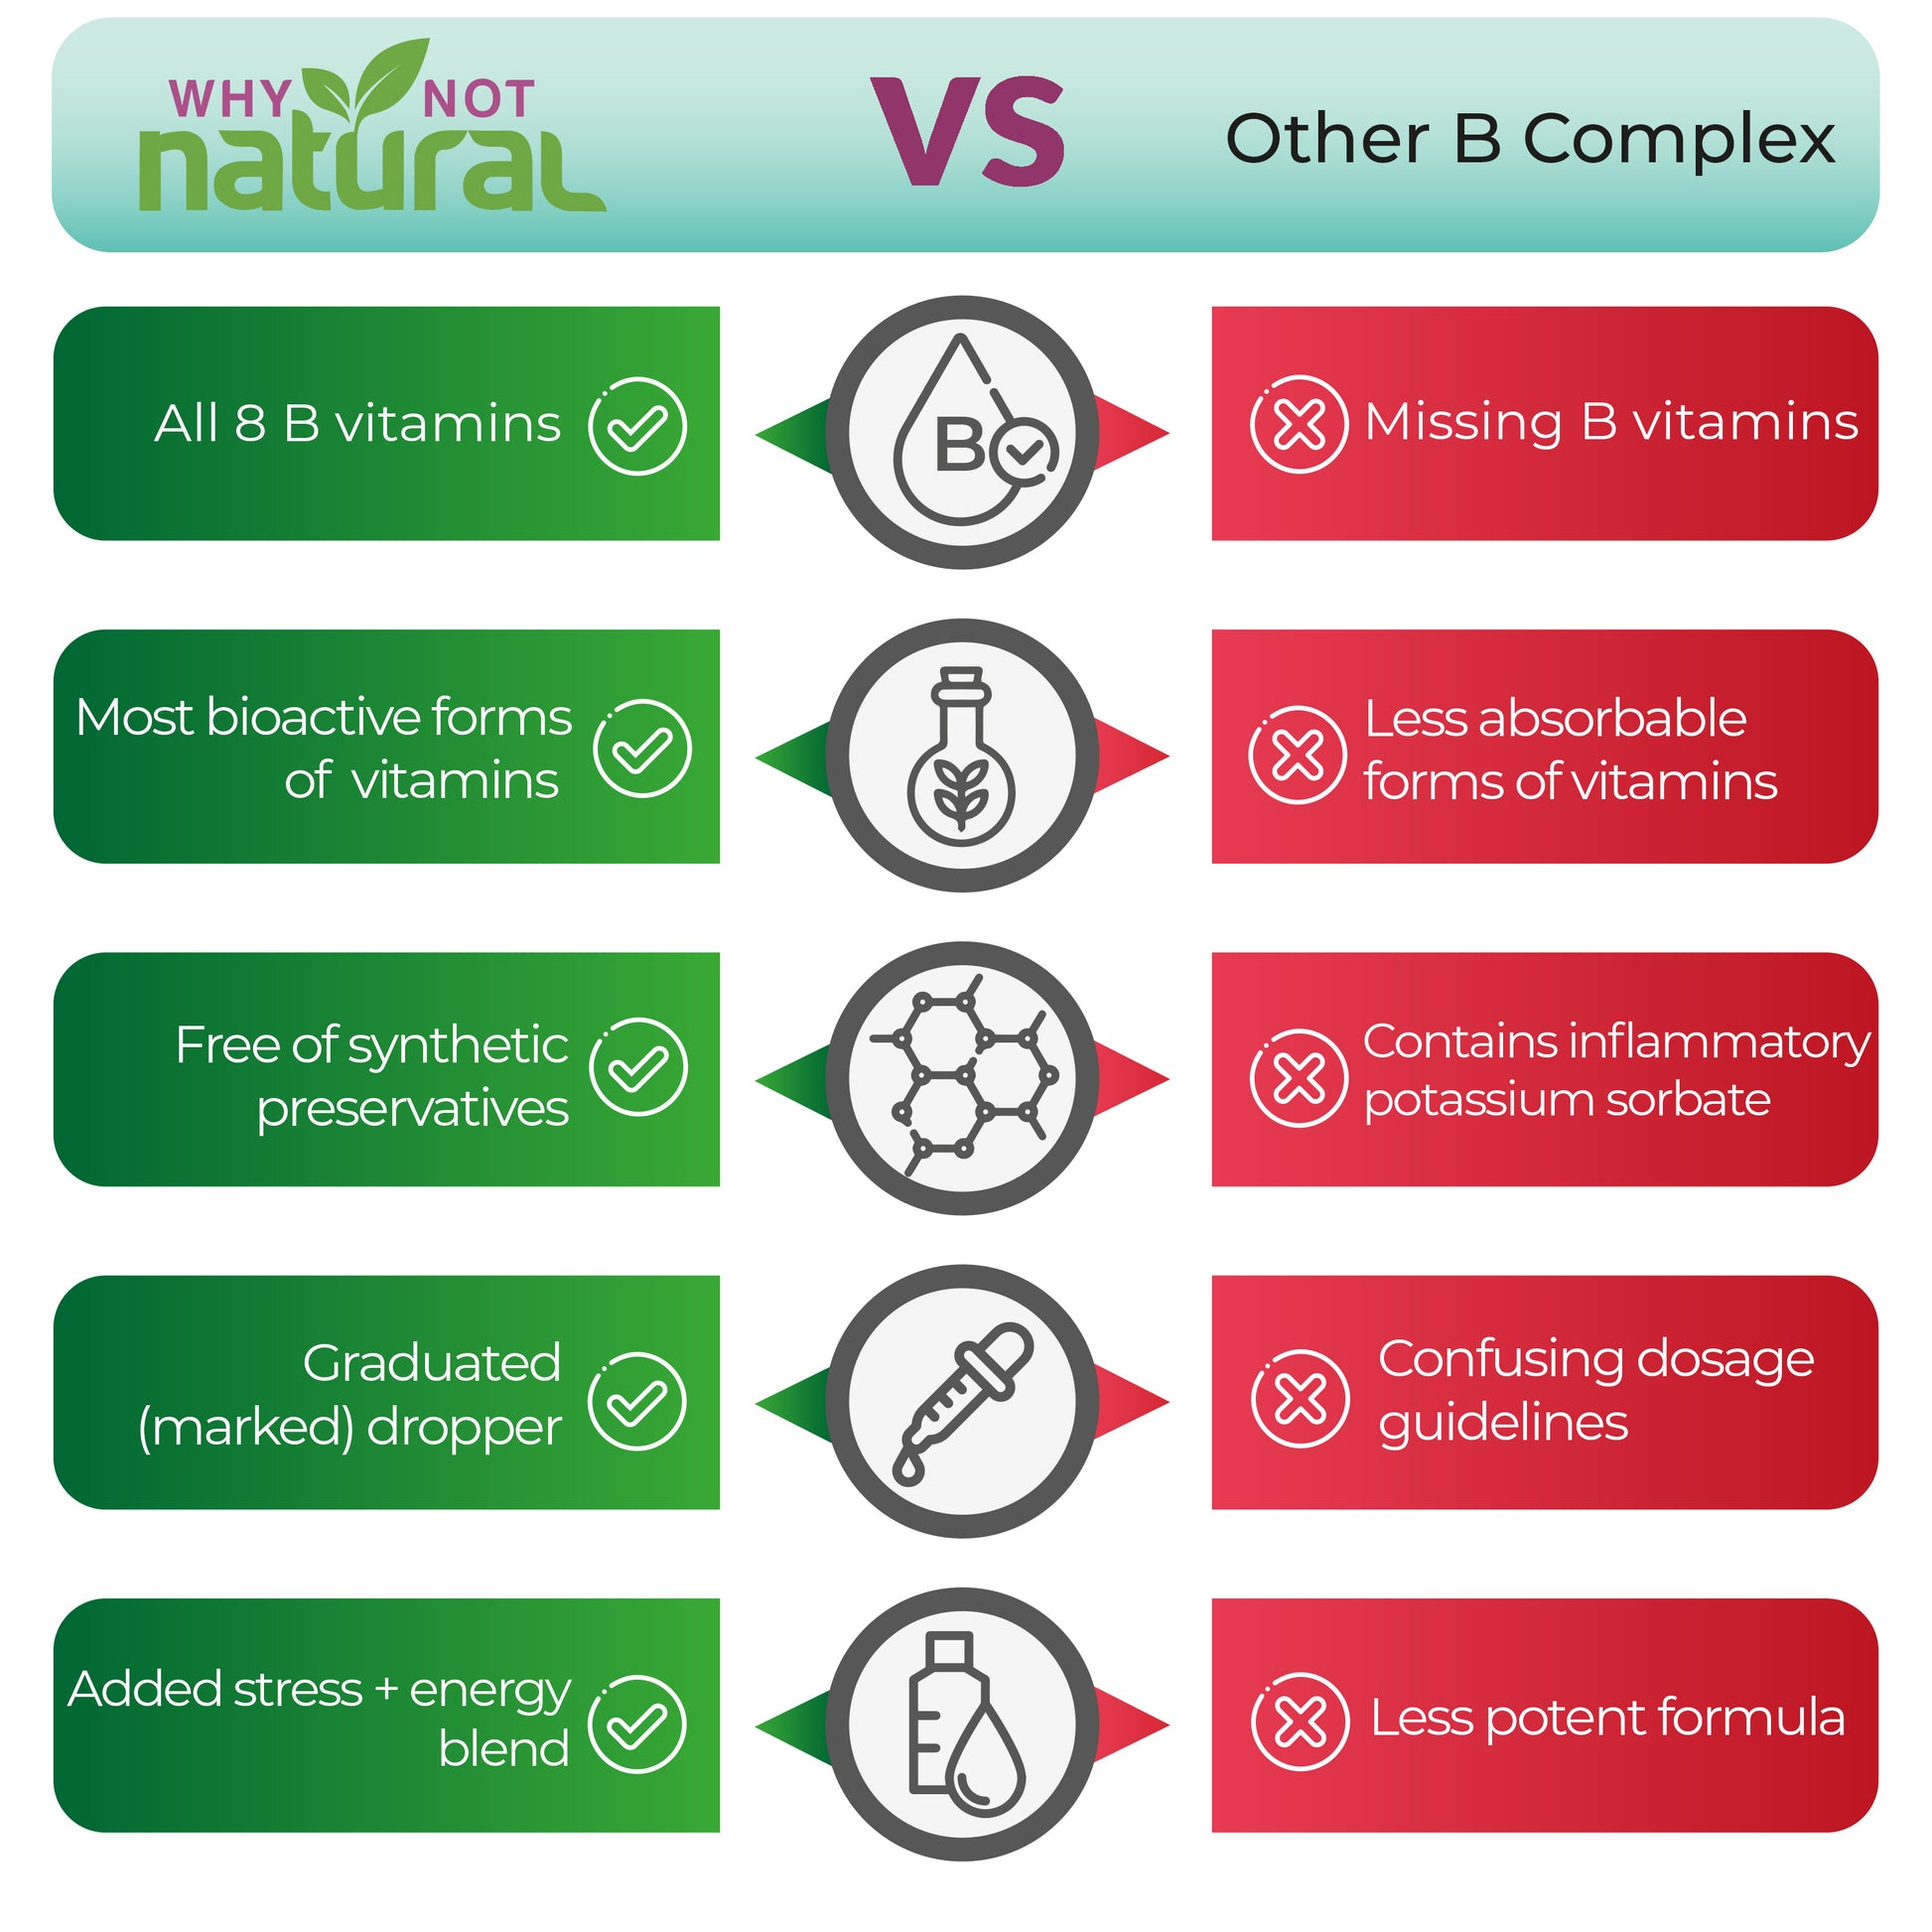 Why Not Natural vs other B complex